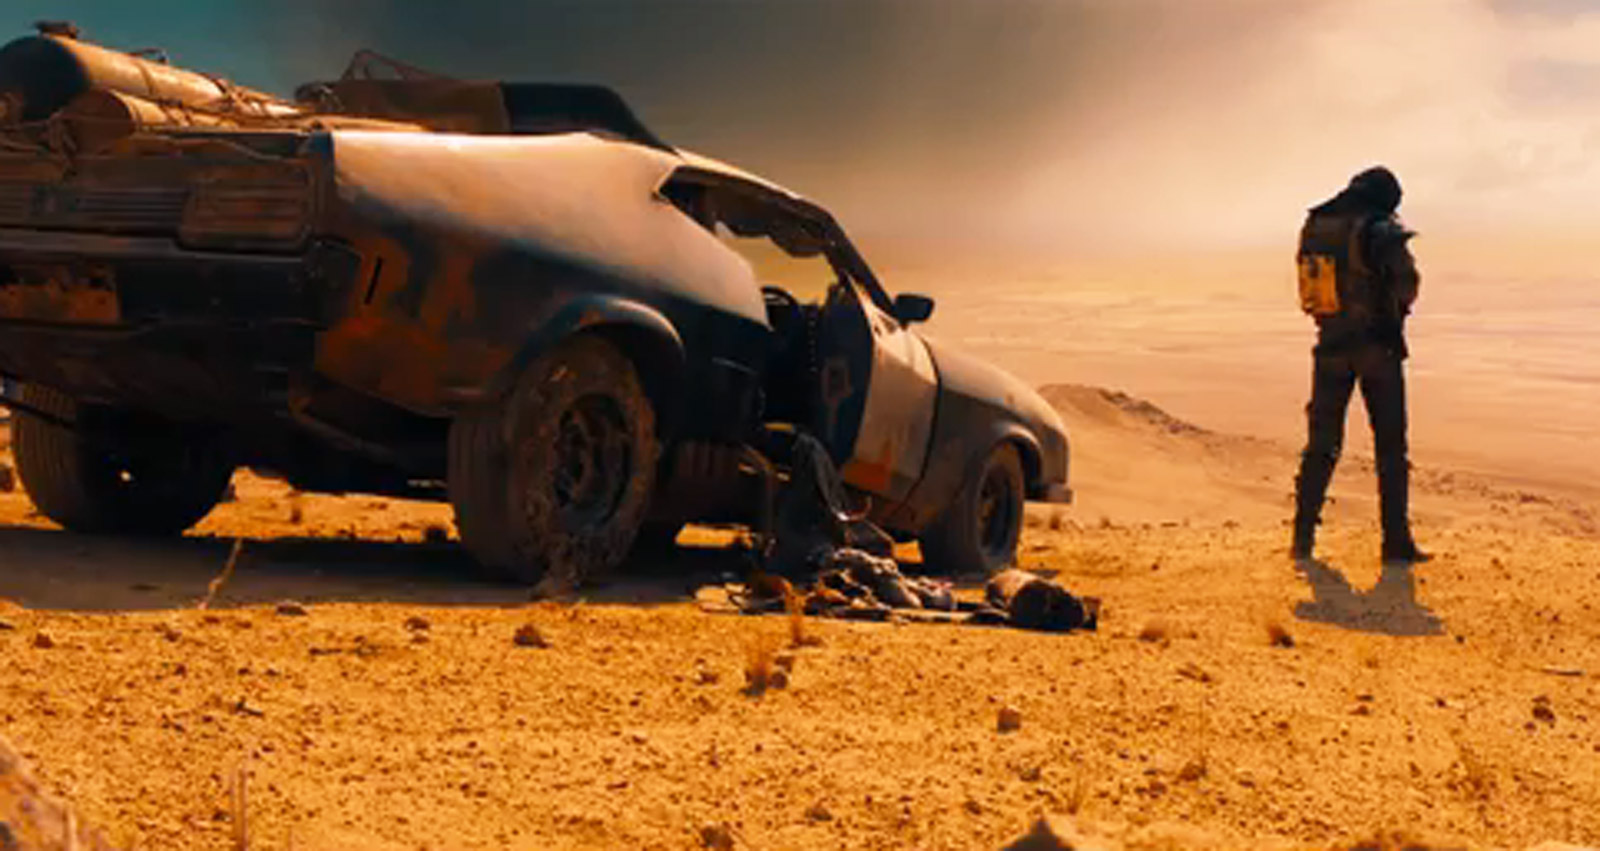 scene-from-mad-max-fury-road_100474074_h.jpg